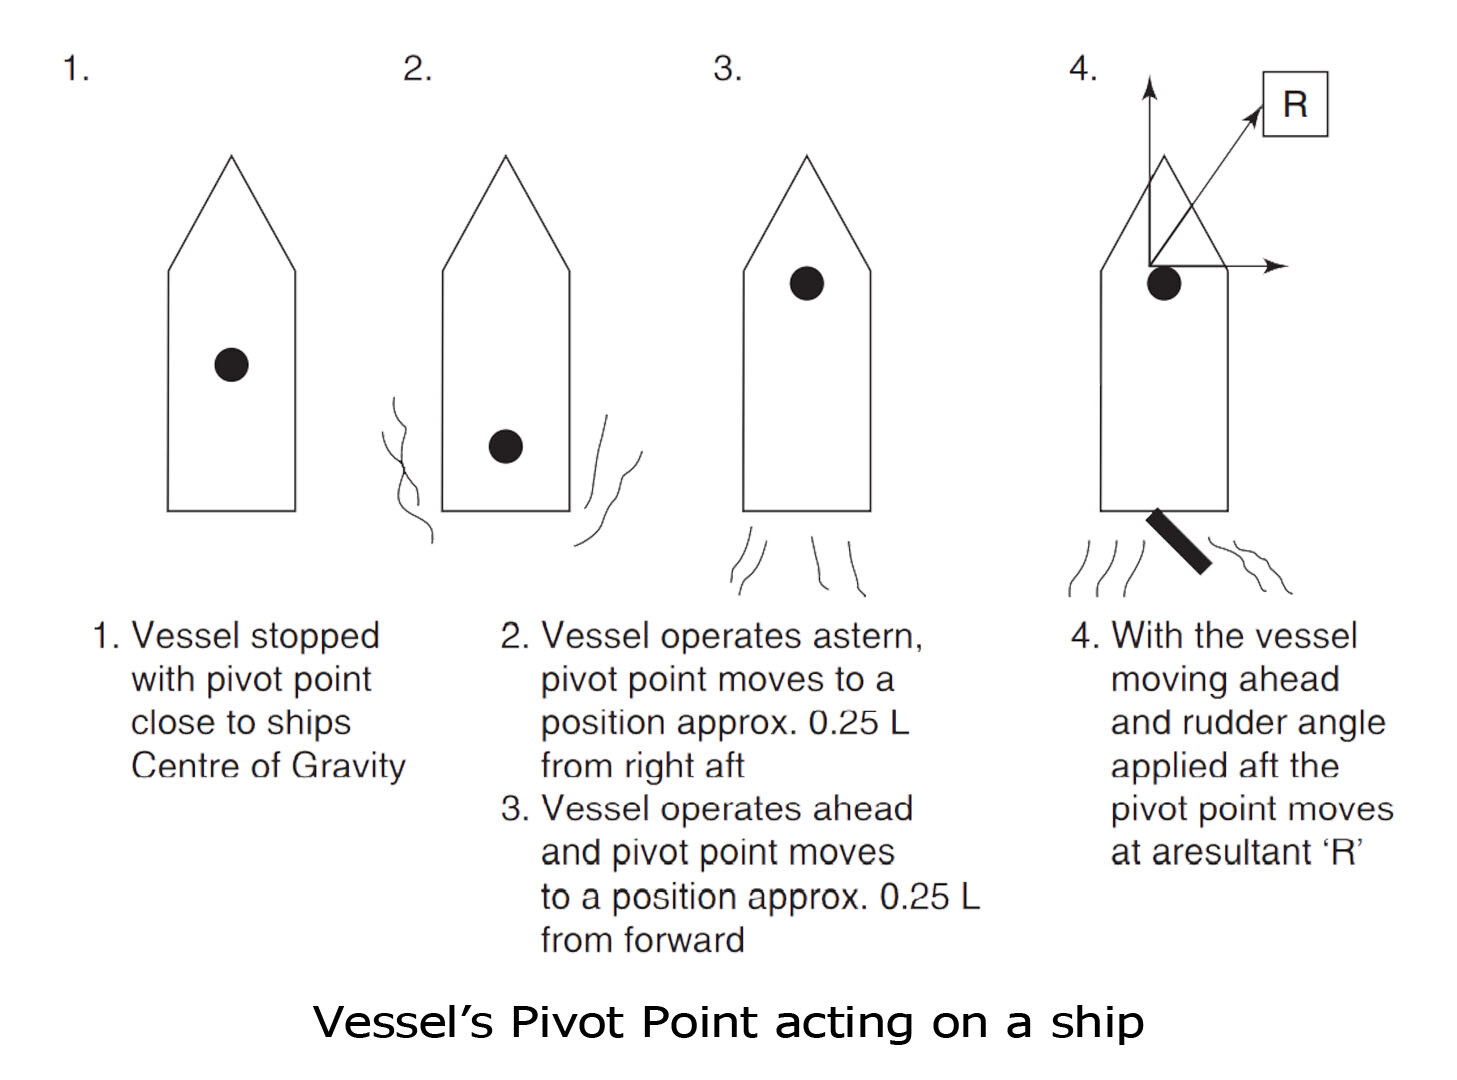 Vessel's Pivot Point acting on a ship when she is stopped, moving astern, and moving ahead.